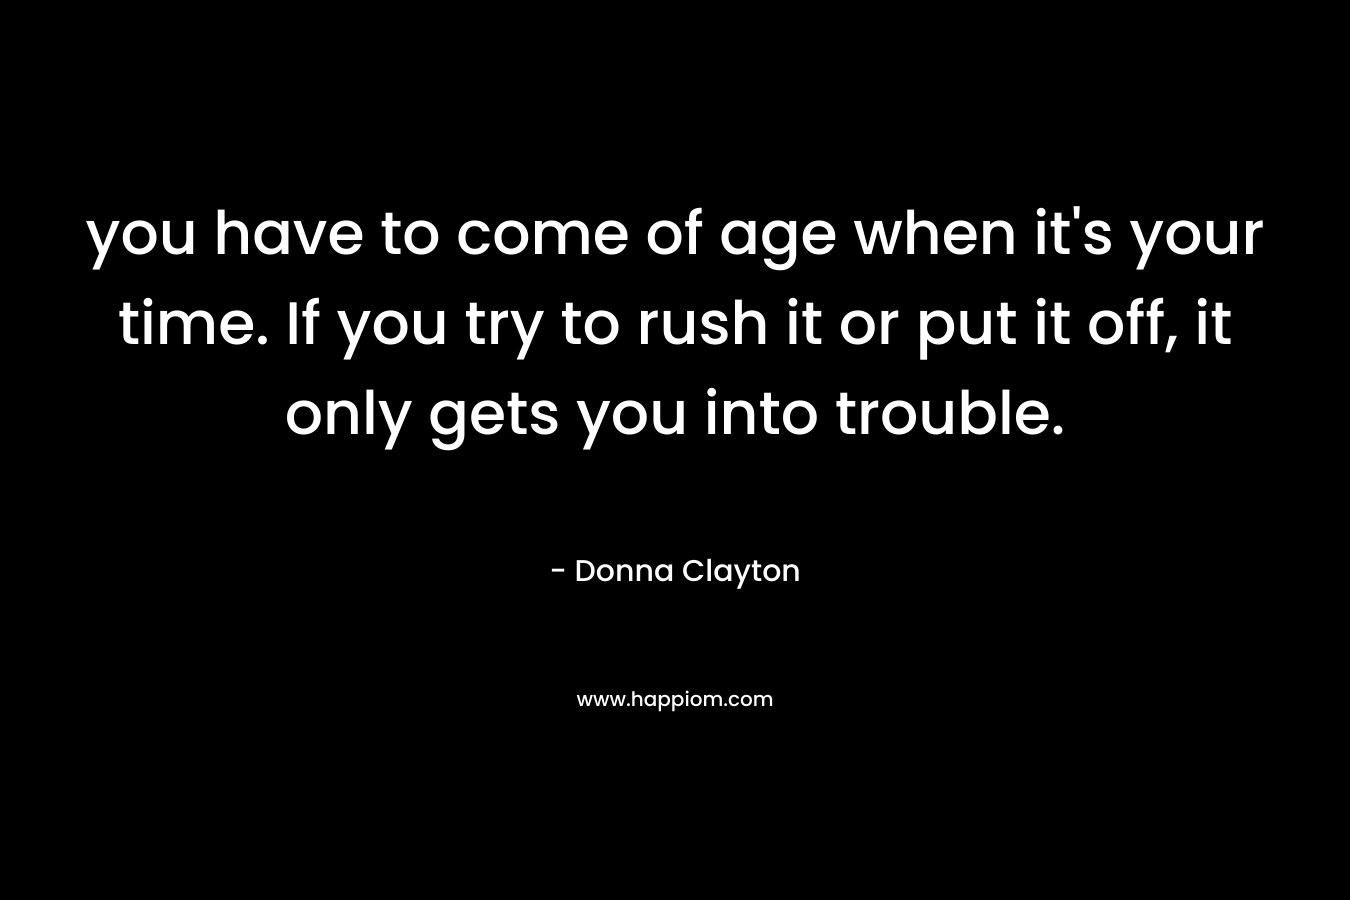 you have to come of age when it's your time. If you try to rush it or put it off, it only gets you into trouble.